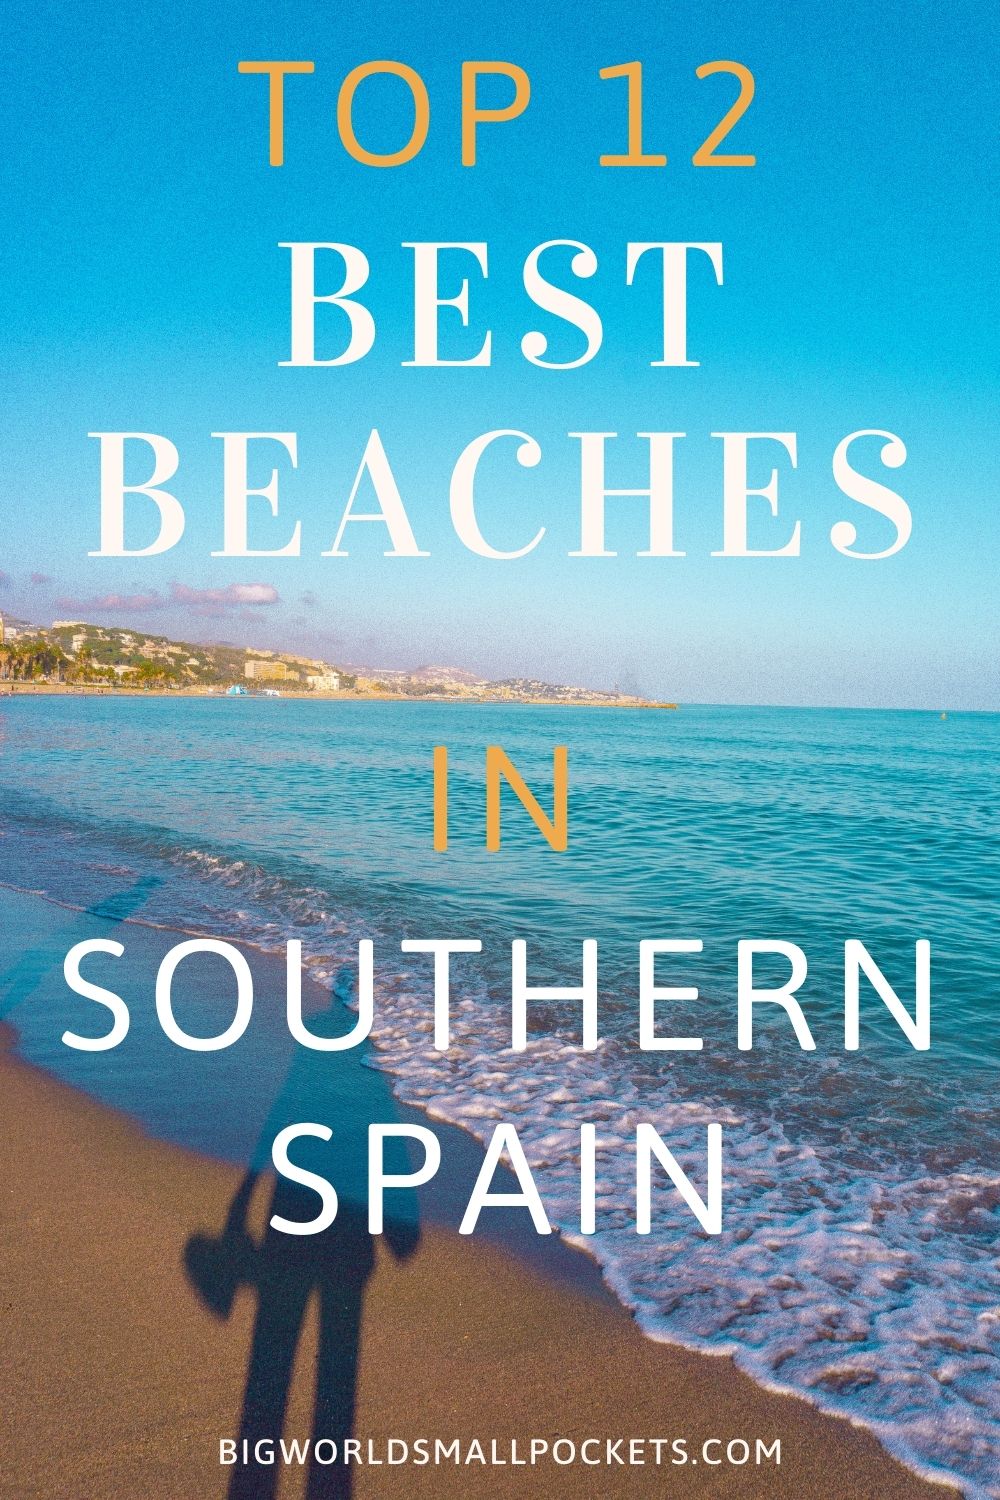 Top 12 Best Beaches in Southern Spain